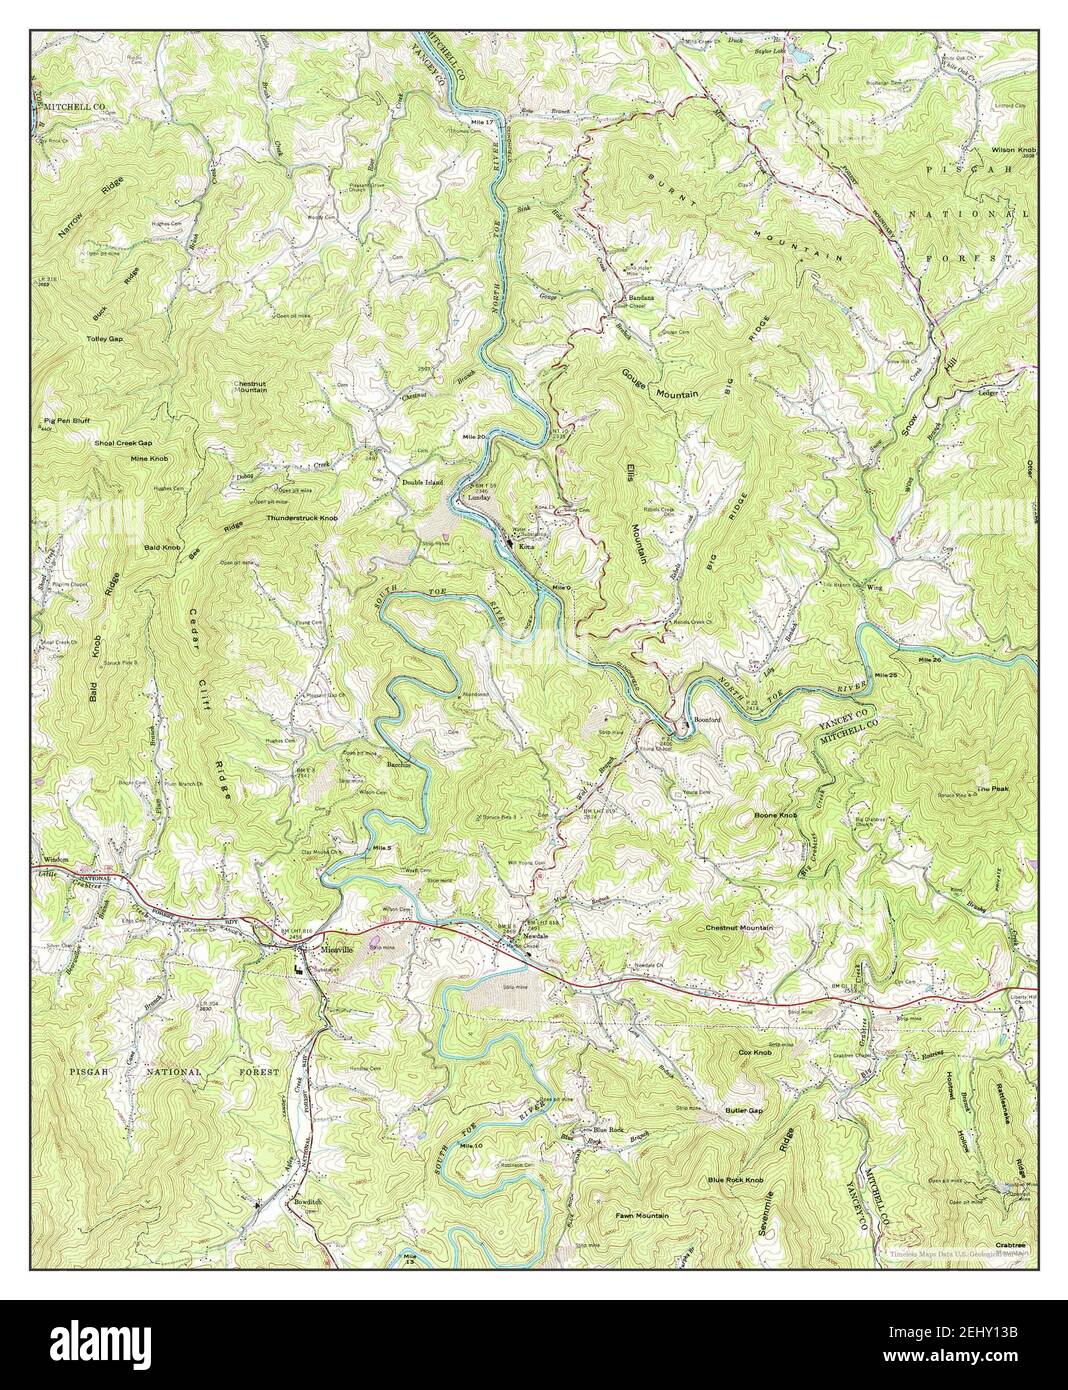 Micaville, North Carolina, map 1960, 1:24000, United States of America by Timeless Maps, data U.S. Geological Survey Stock Photo